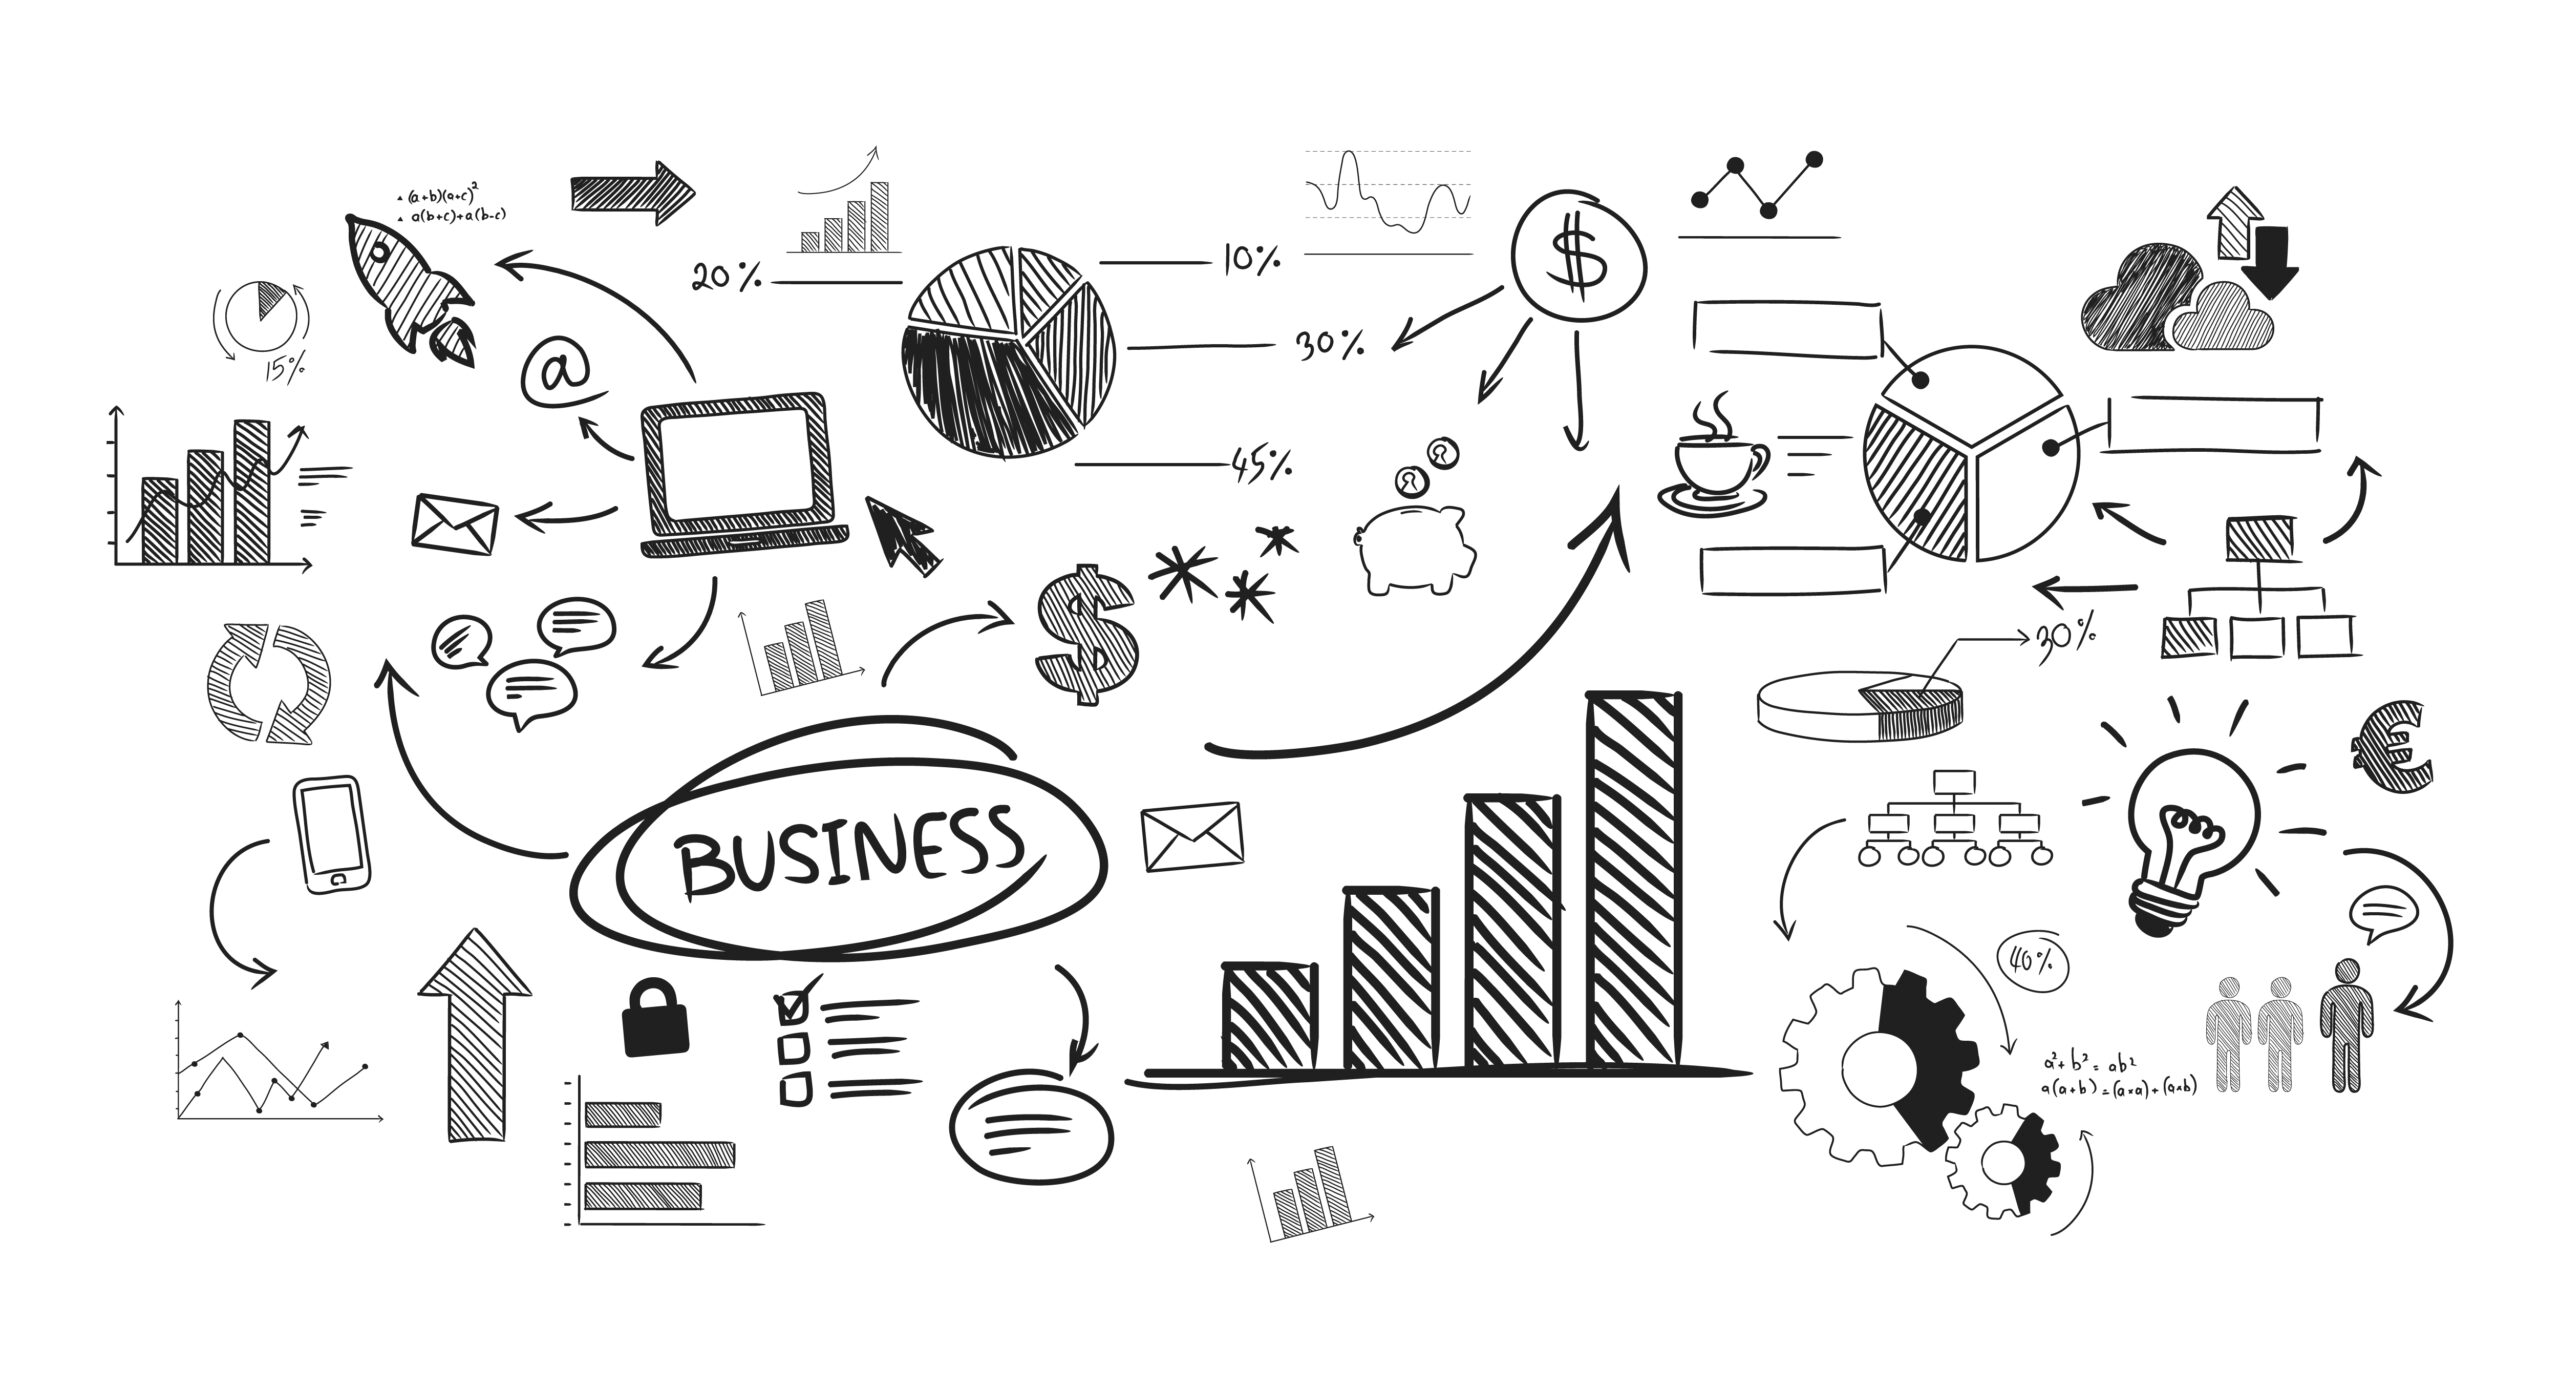 The image is a sketch-style illustration filled with various business-related symbols and diagrams. It includes bar graphs, pie charts, arrows, dollar signs, light bulbs, gears, and communication icons like envelopes and speech bubbles. There are also icons representing growth, such as a rocket, an upward arrow, and increasing graph lines. At the center, the word "BUSINESS" is prominently displayed. The overall design conveys a dynamic and interconnected view of business concepts and processes, highlighting elements of strategy, communication, and growth.